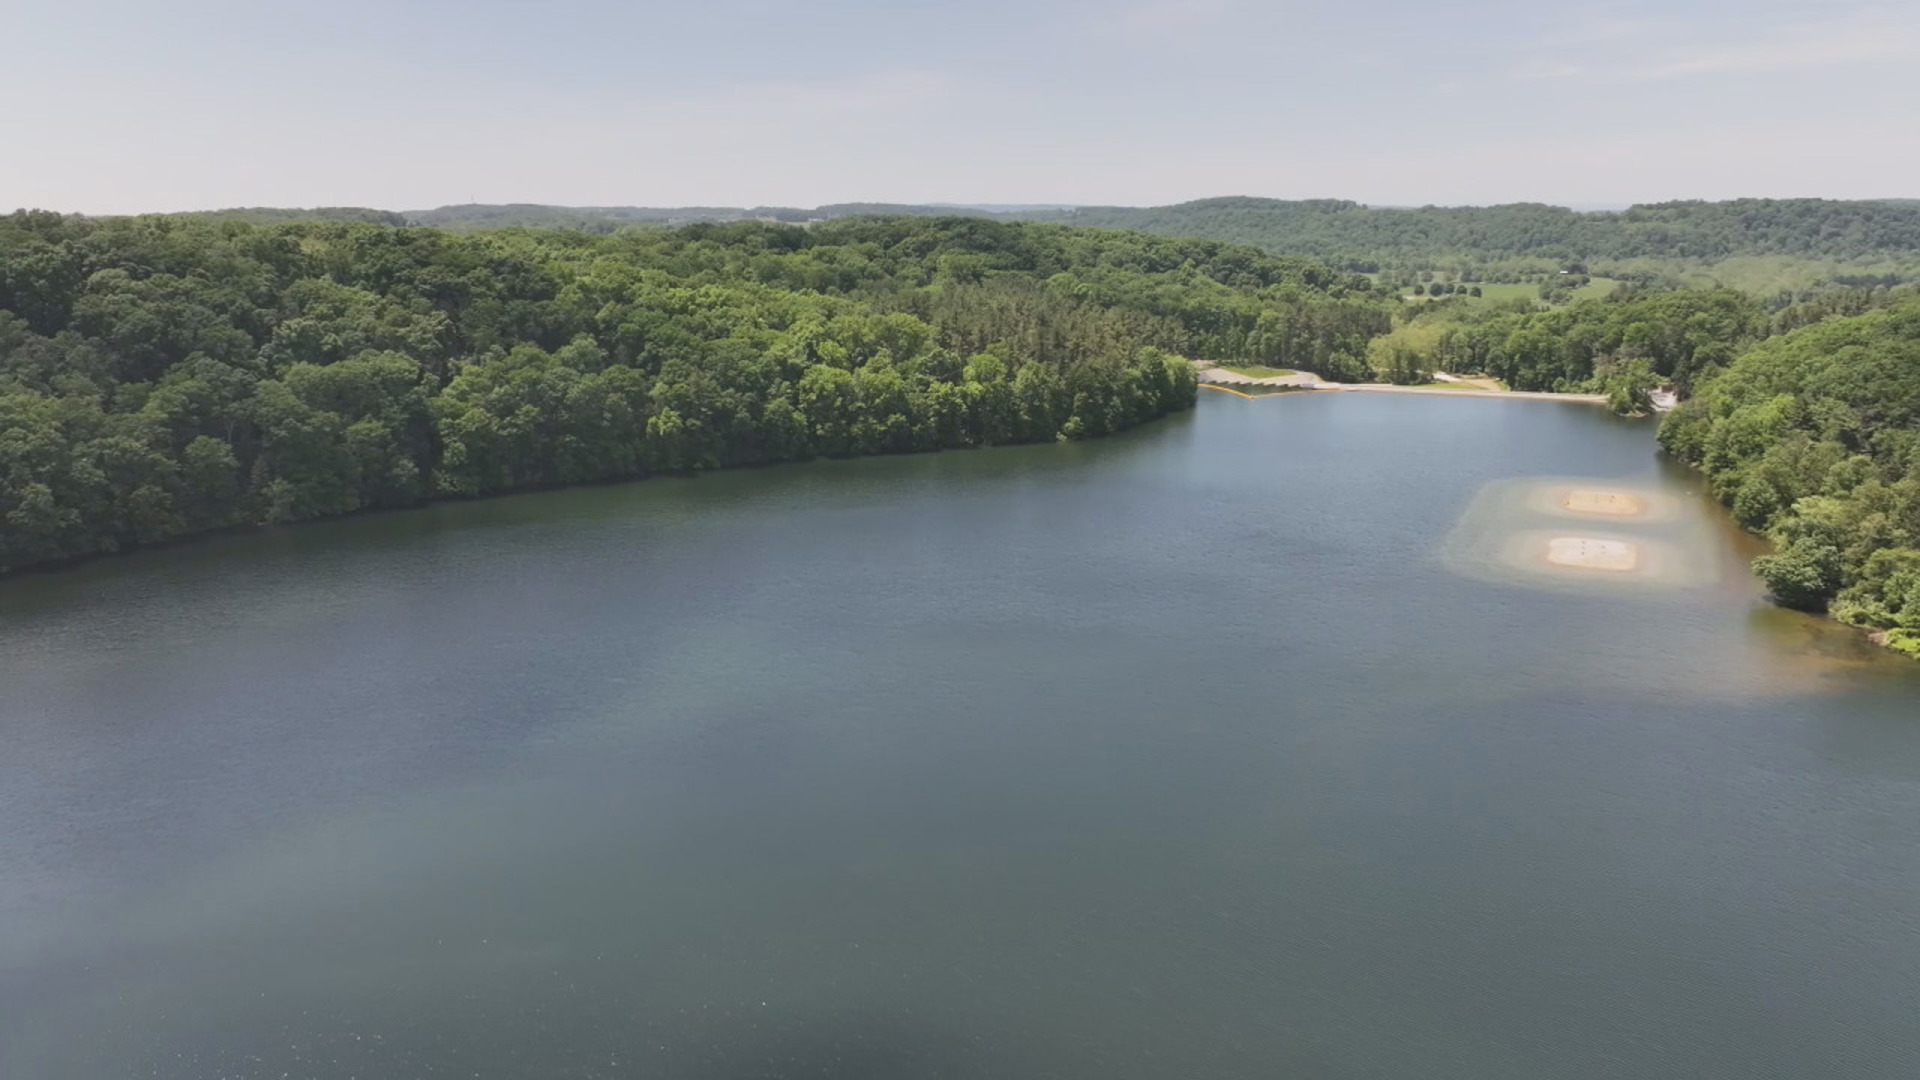 Lake Williams is expected to re-open soon for recreation after more than two years of work.